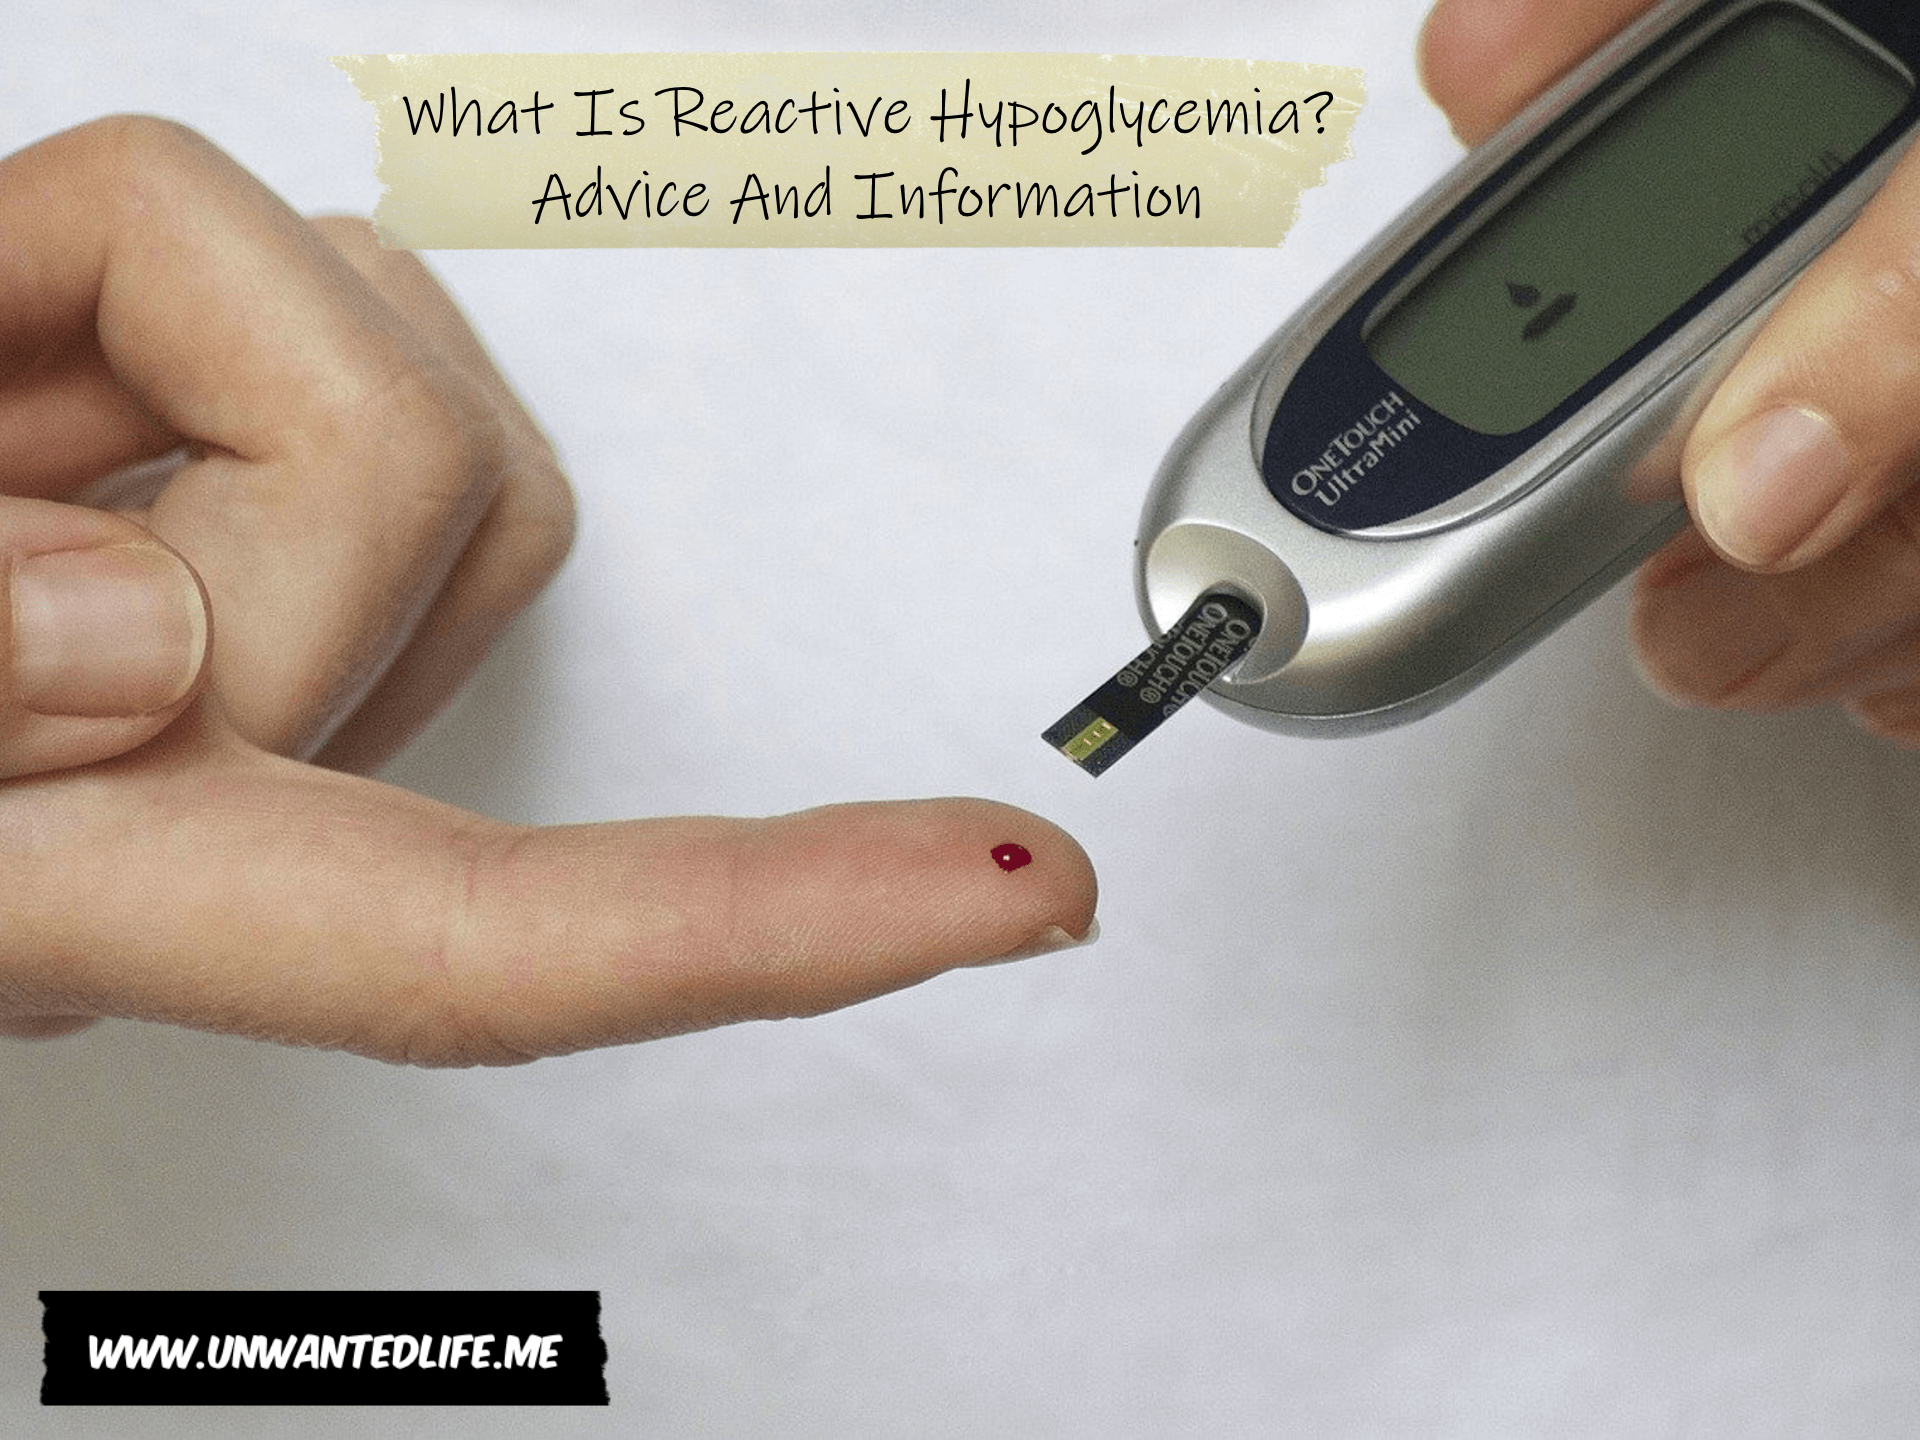 A photo of a white person doing a blood sugar check after a finger prick with the article title - What Is Reactive Hypoglycemia? Advice And Information - across the top of the image